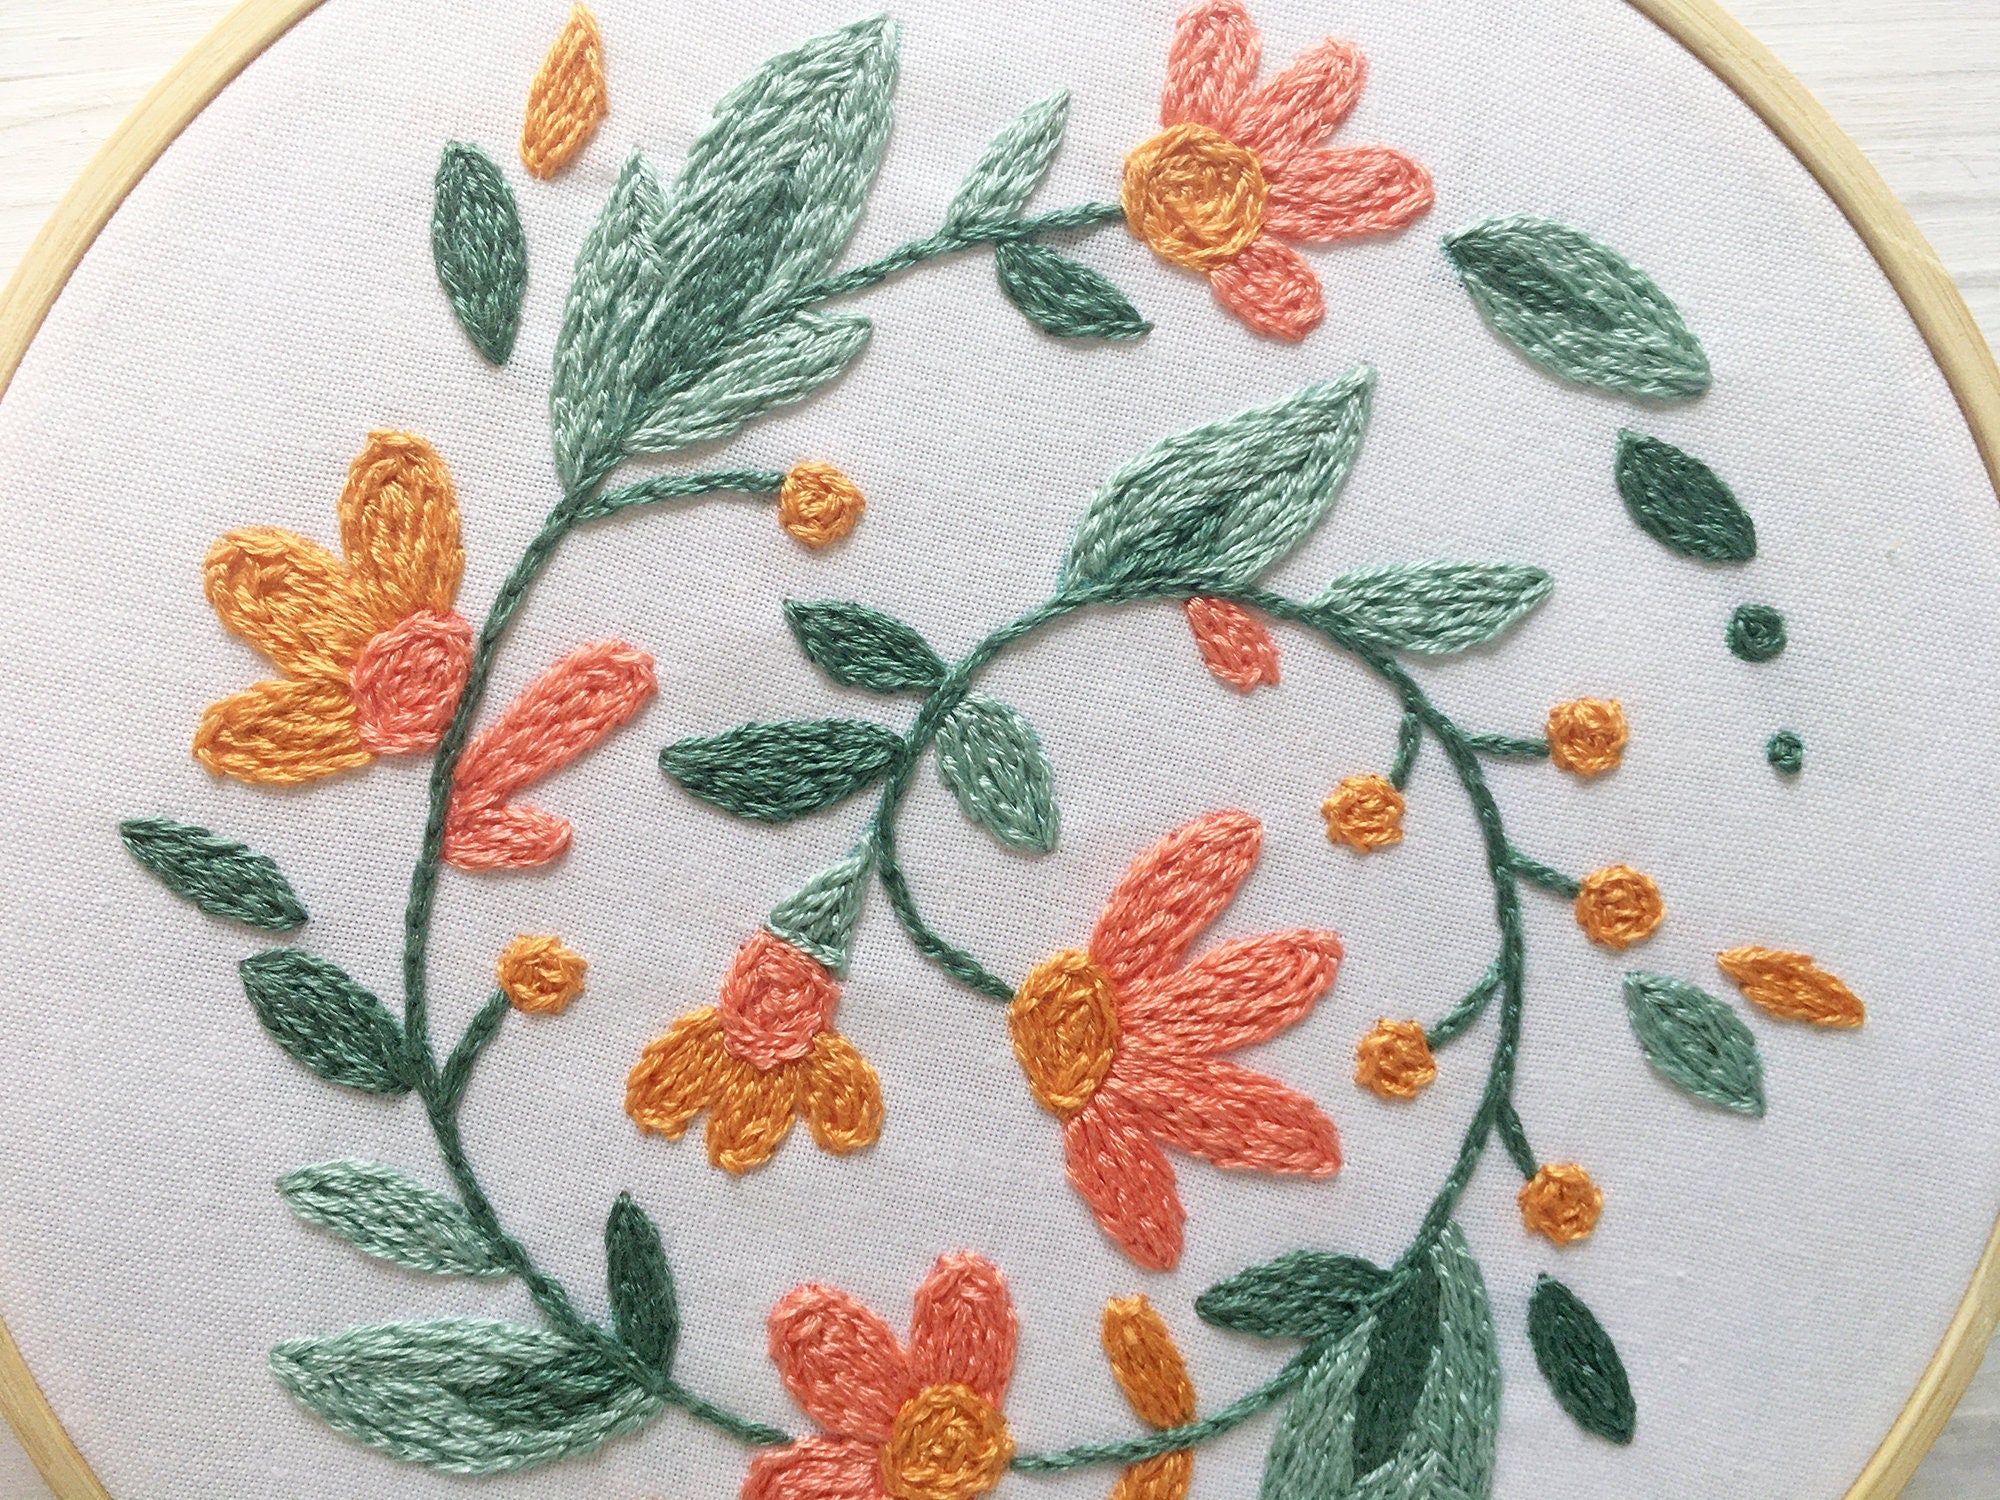 Stick and Stitch Embroidery Patterns, DIY Embroidery Patches, Floral  Embroidery Patches, Floral Wreath, Water Soluble Embroidery Designs -   Denmark